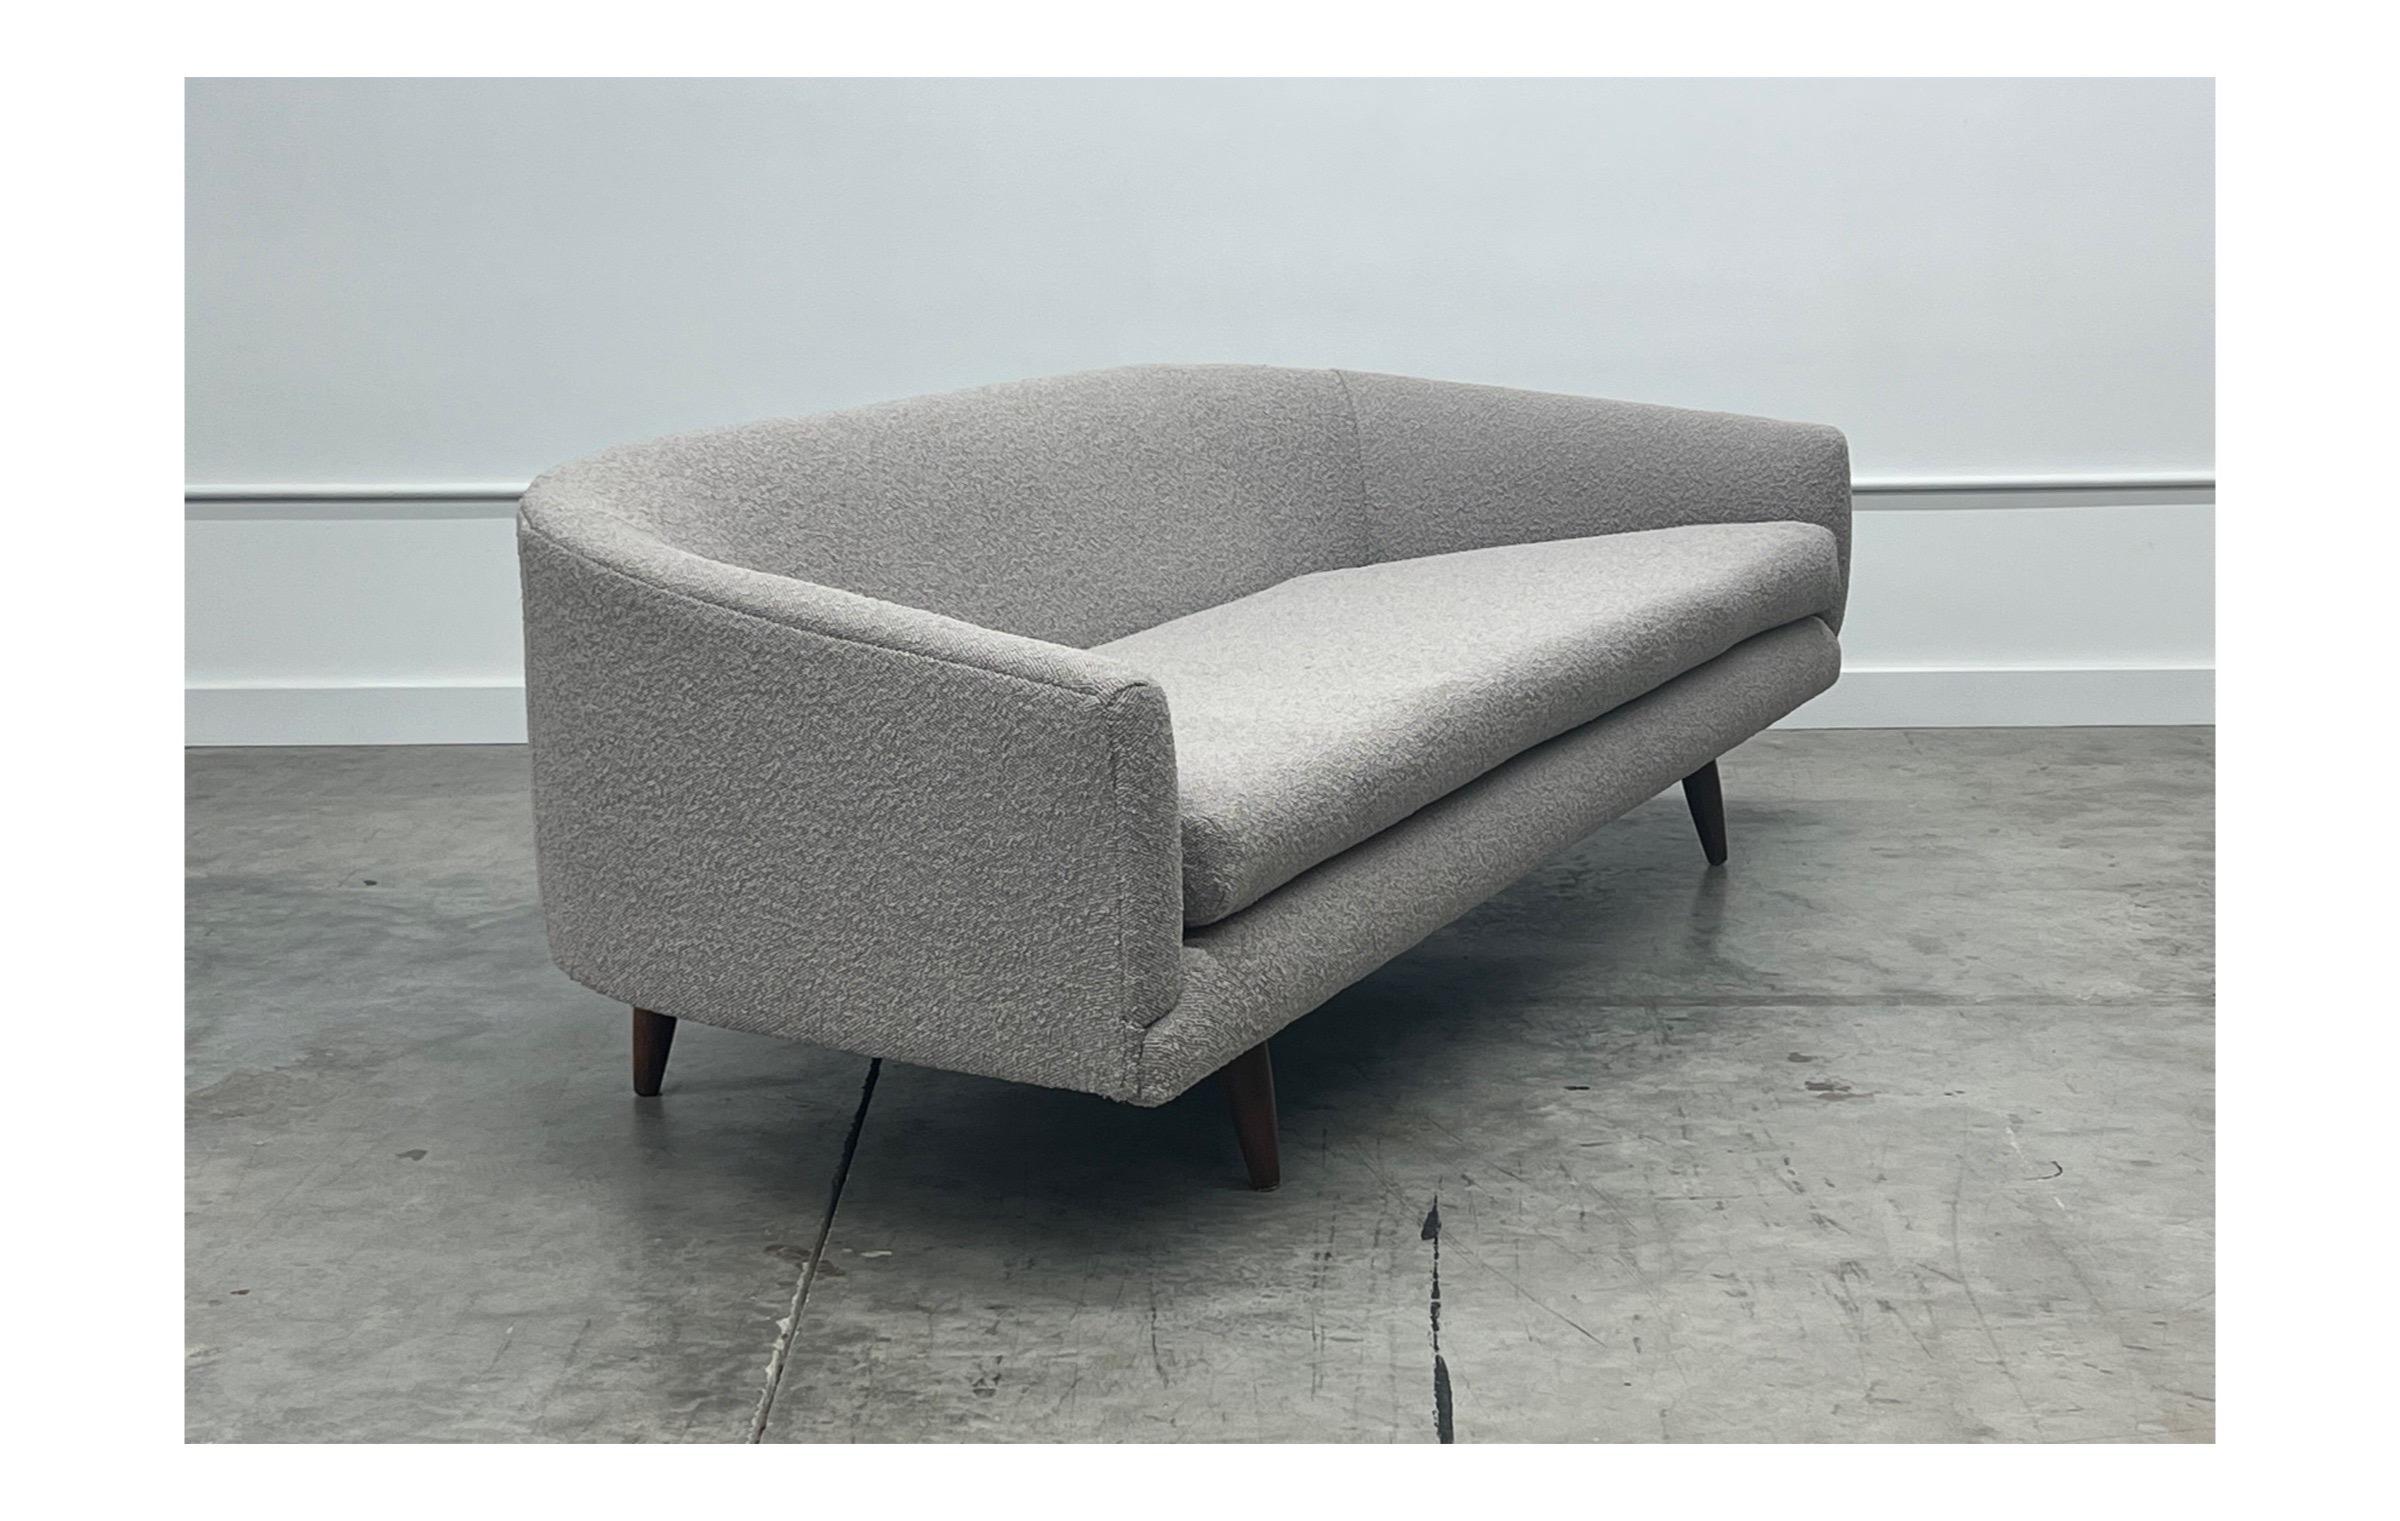 American 1950s Adrian Pearsall for Craft Associates Cloud Sofa